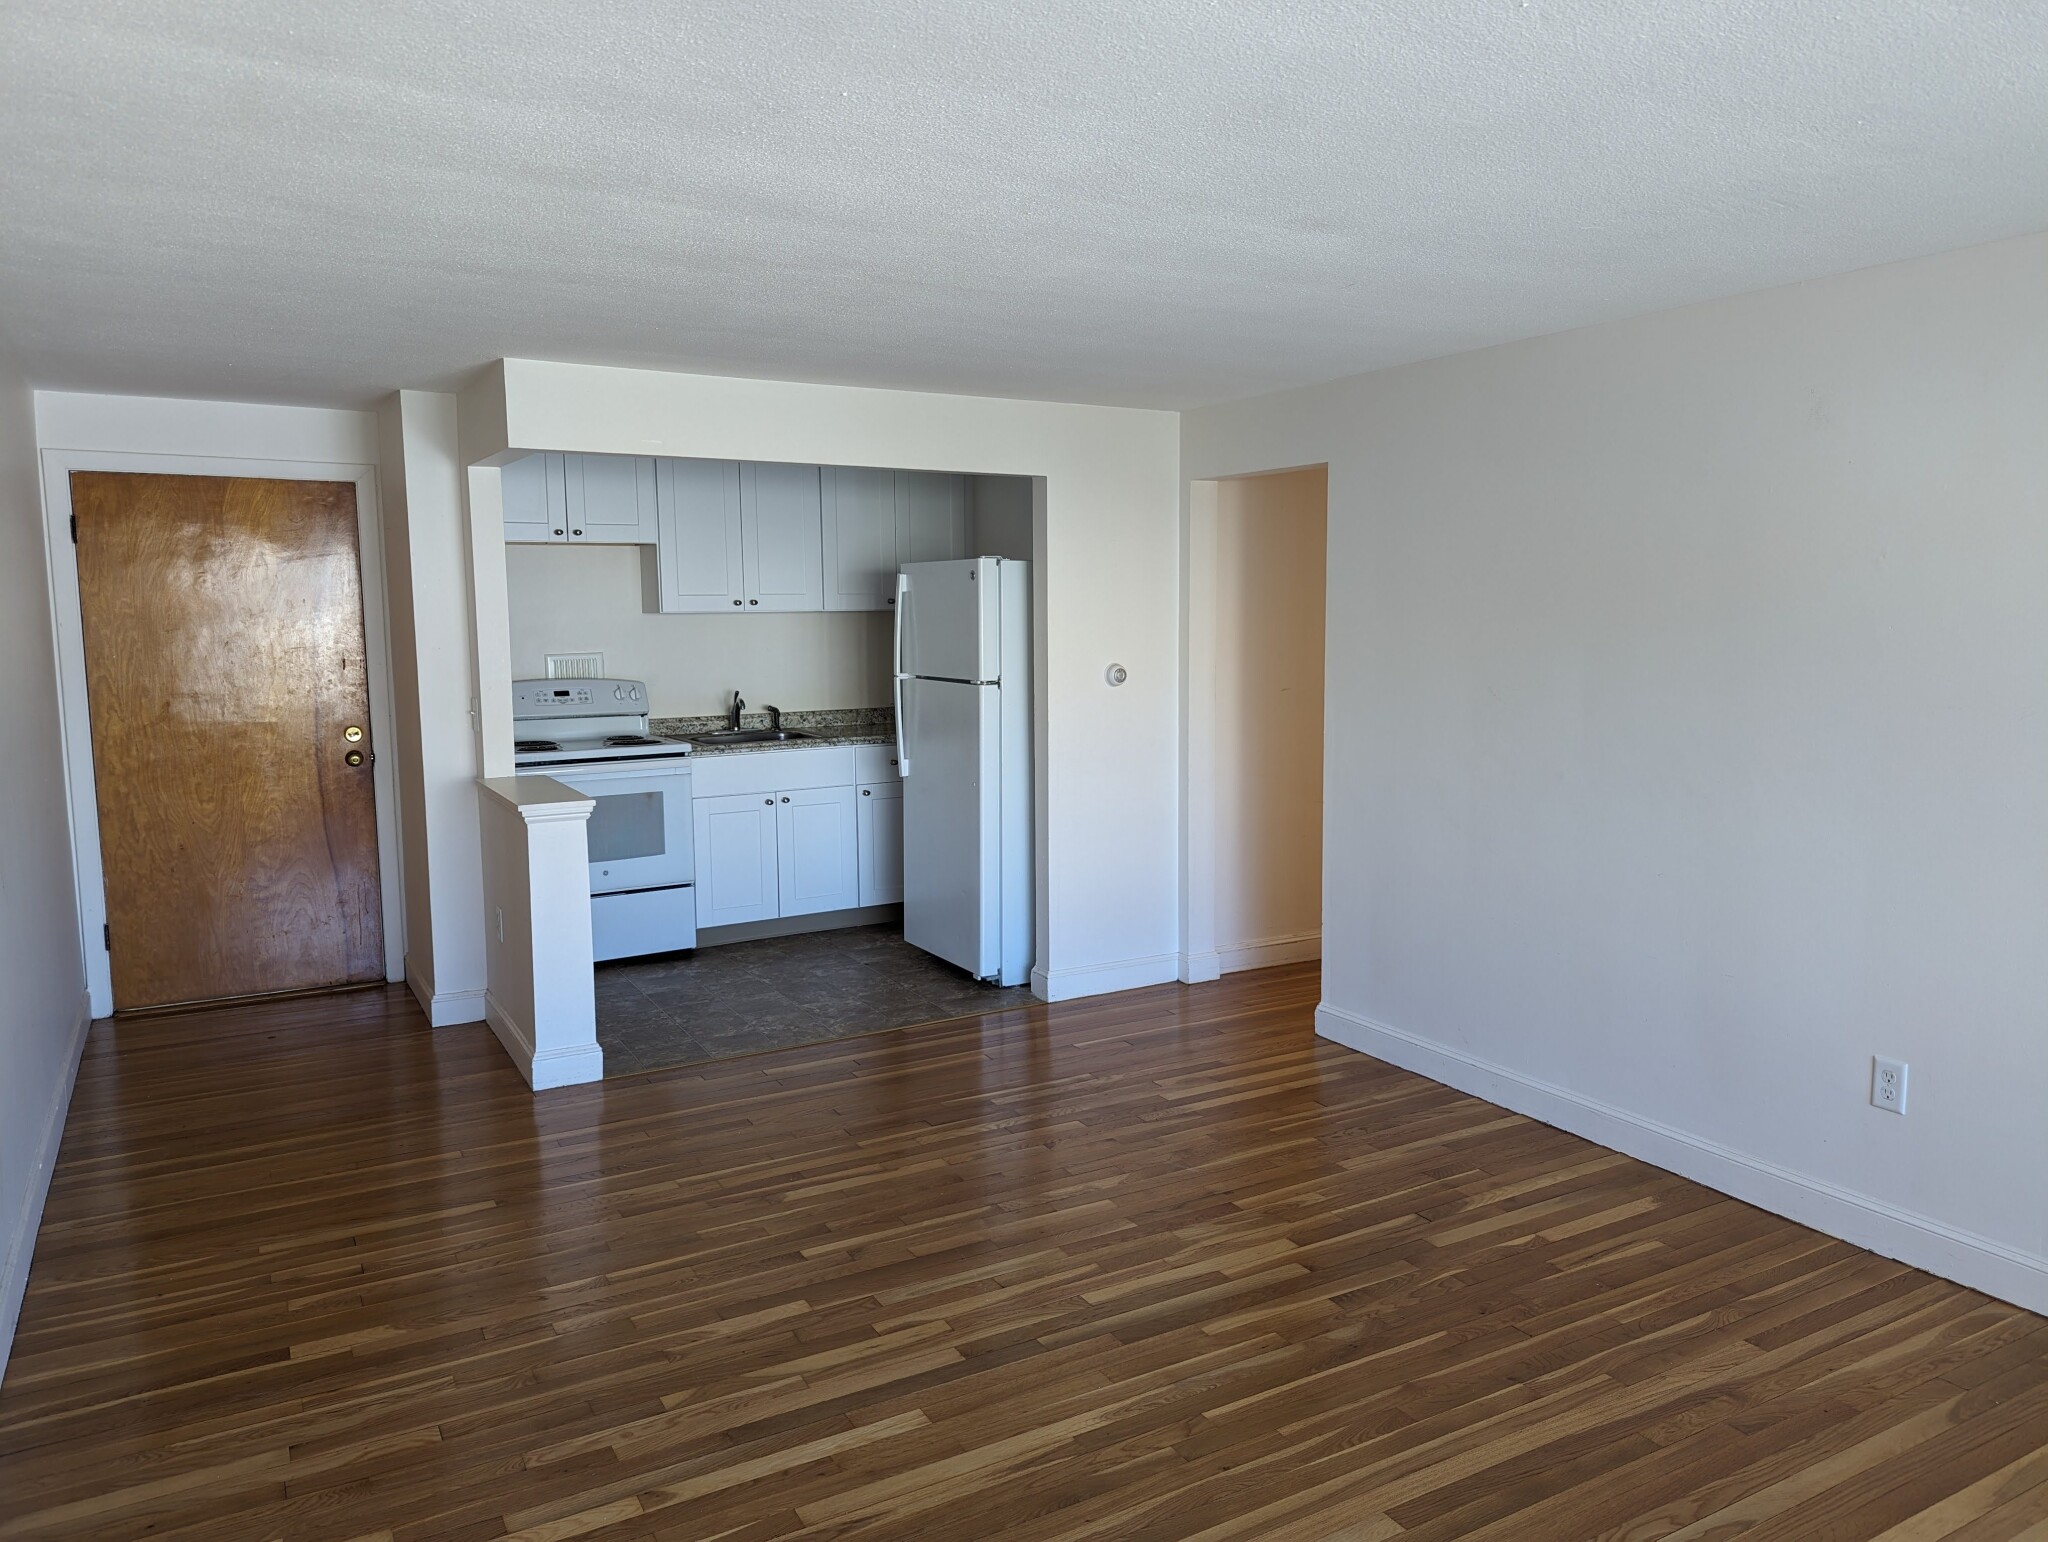 Photos of apartment on Chipman Ave.,Melrose MA 02176